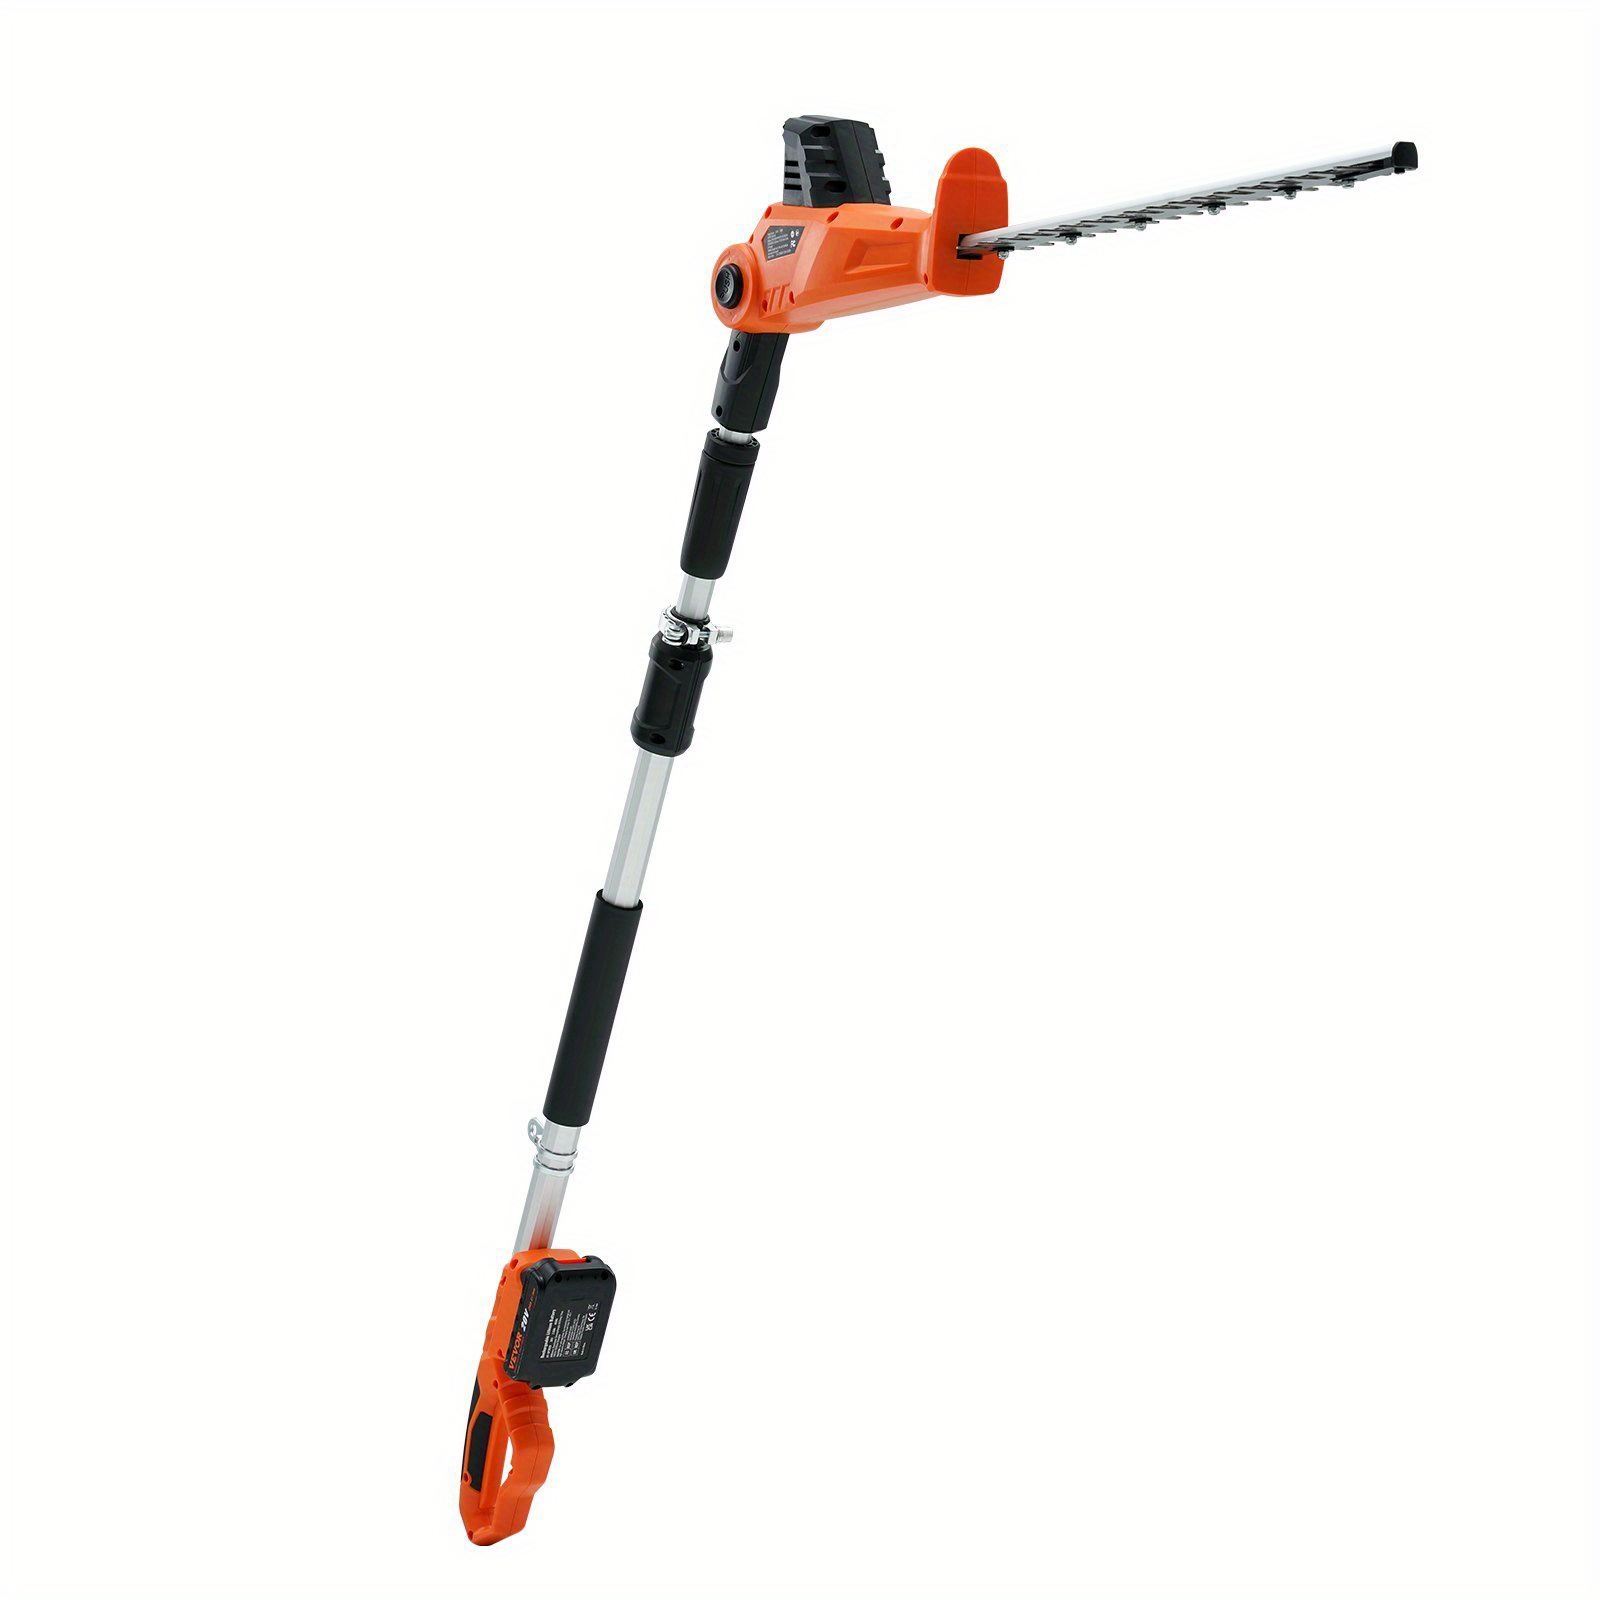 

Cordless Hedge Trimmer, 18 Inch Double-edged Steel Blade, Pole Hedge Trimmer Kit 20v Battery, Fast Charger Included, 74"-94" Telescoping Design For High Branches